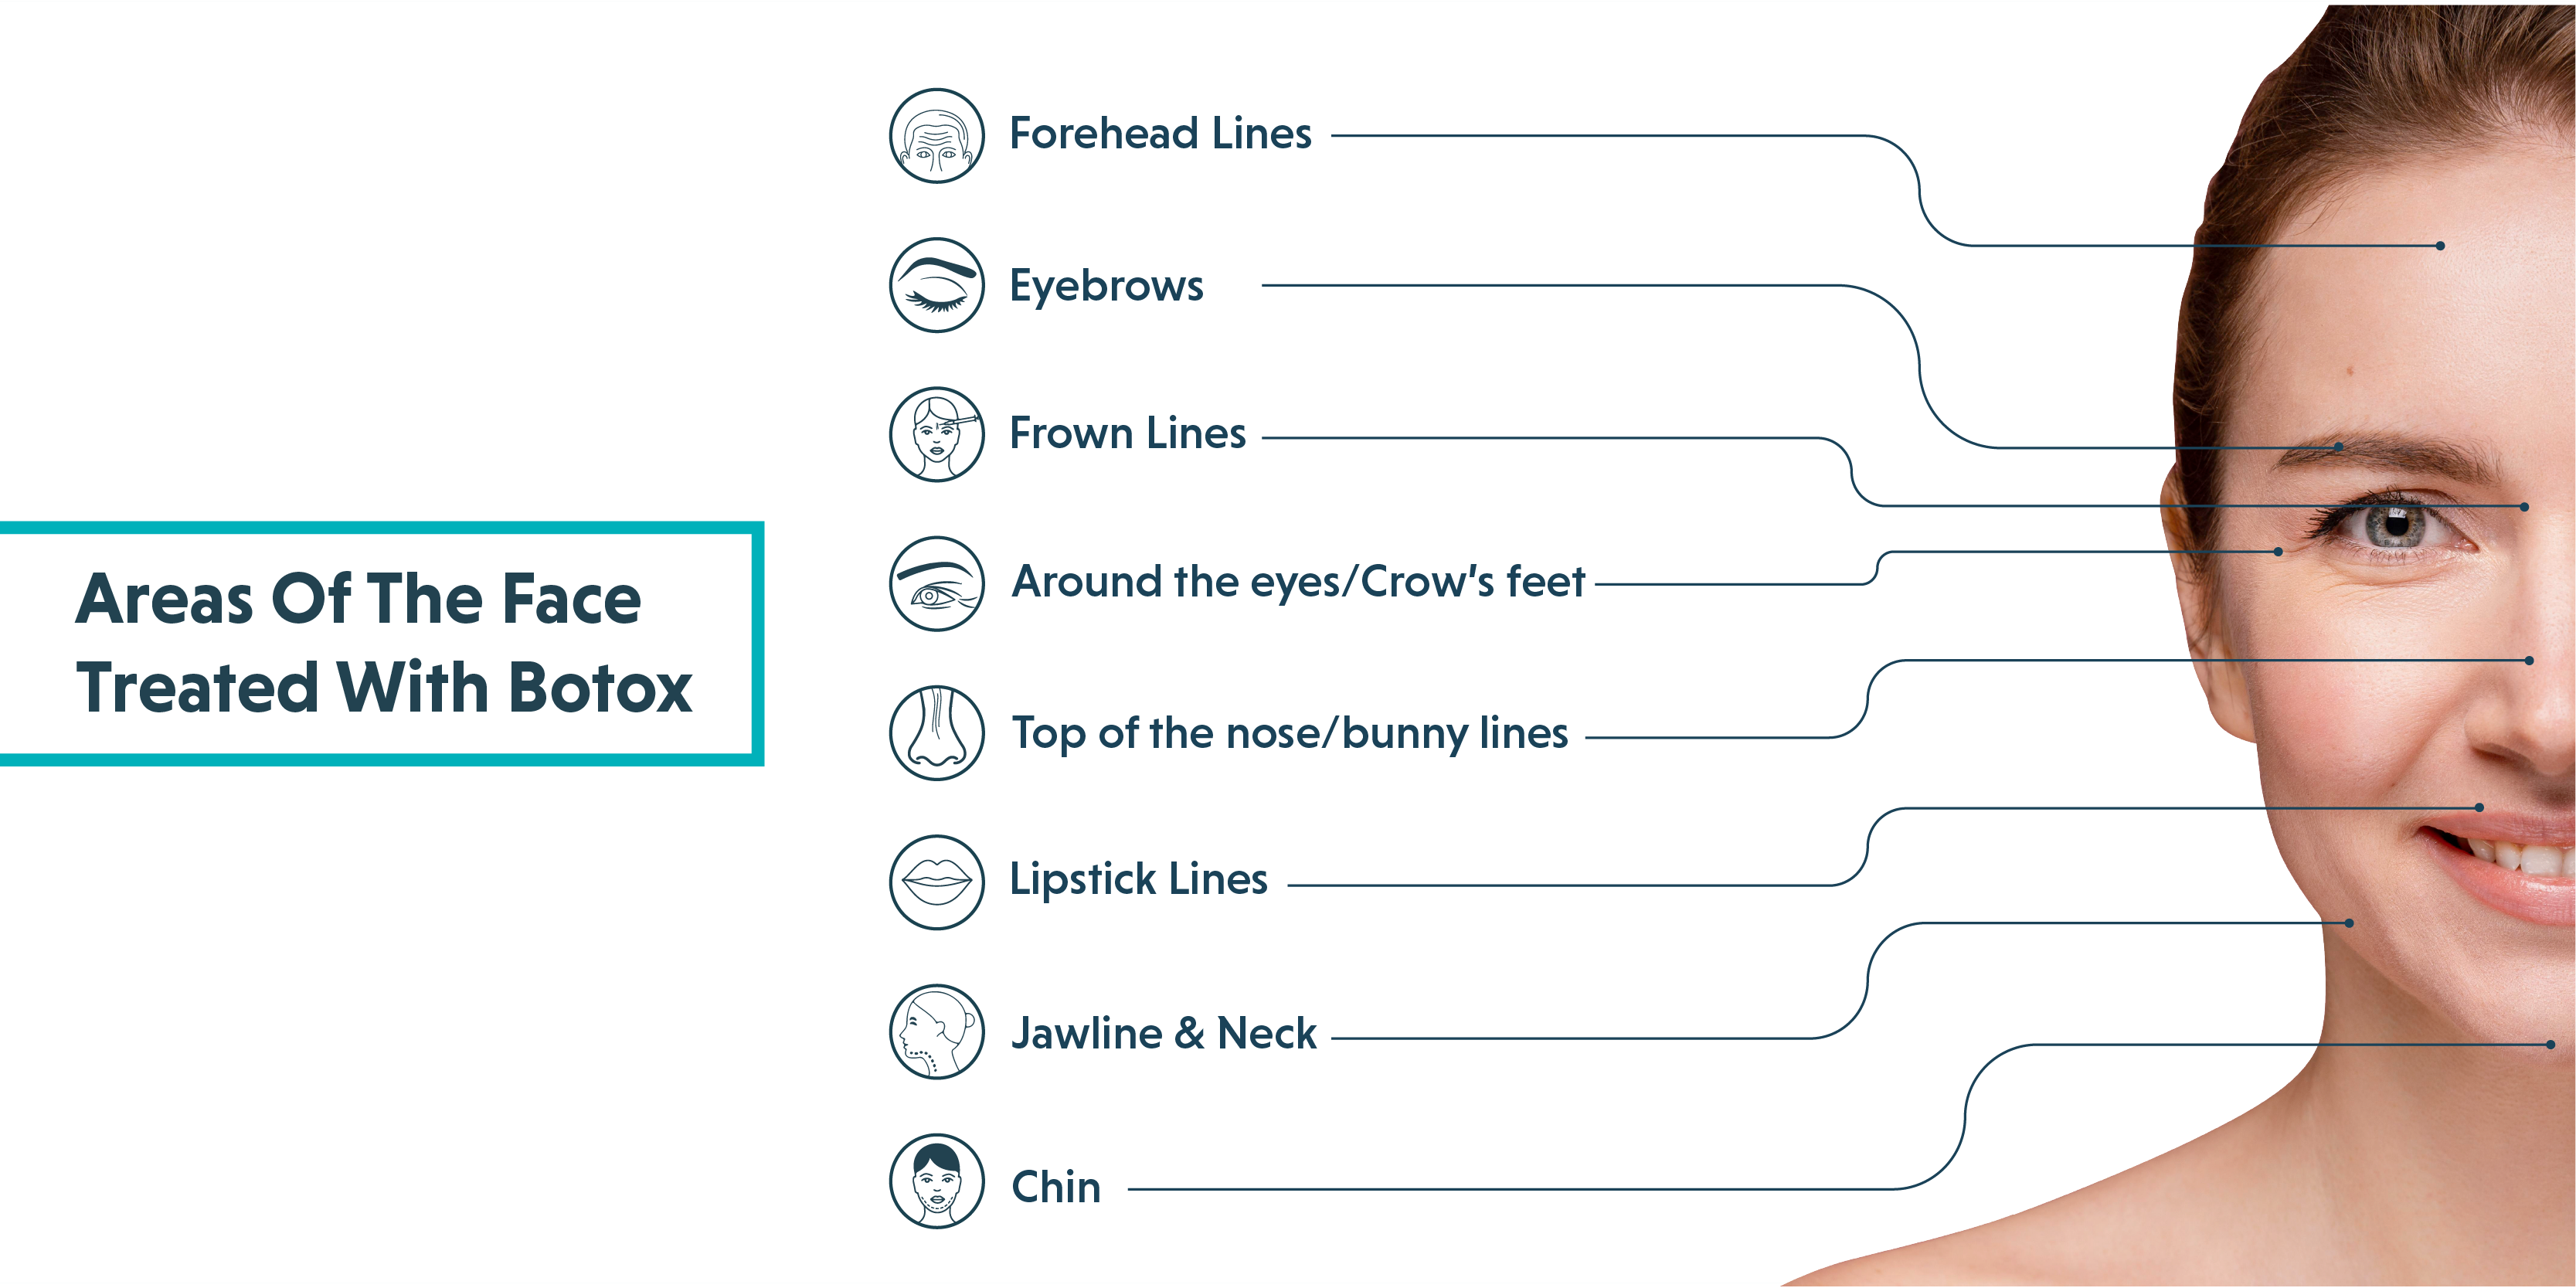 areas of the face treated with botox